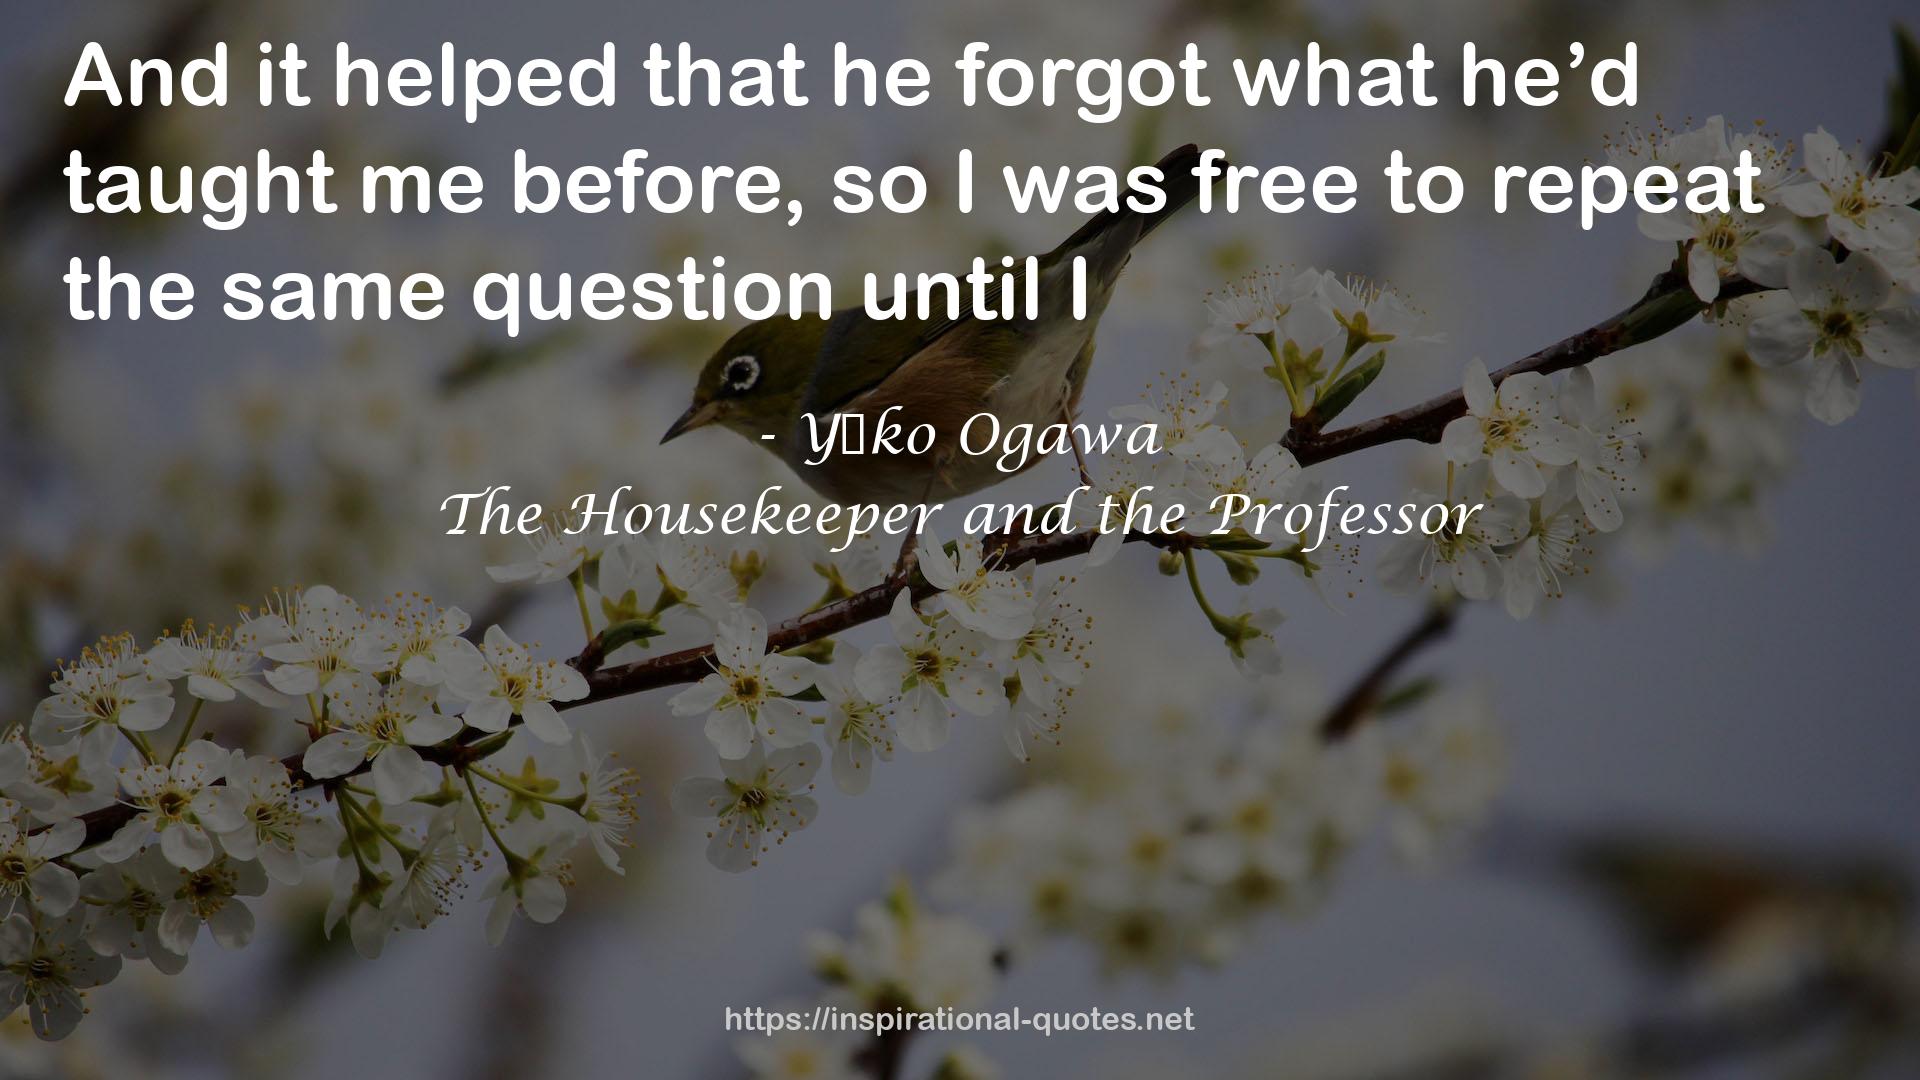 The Housekeeper and the Professor QUOTES